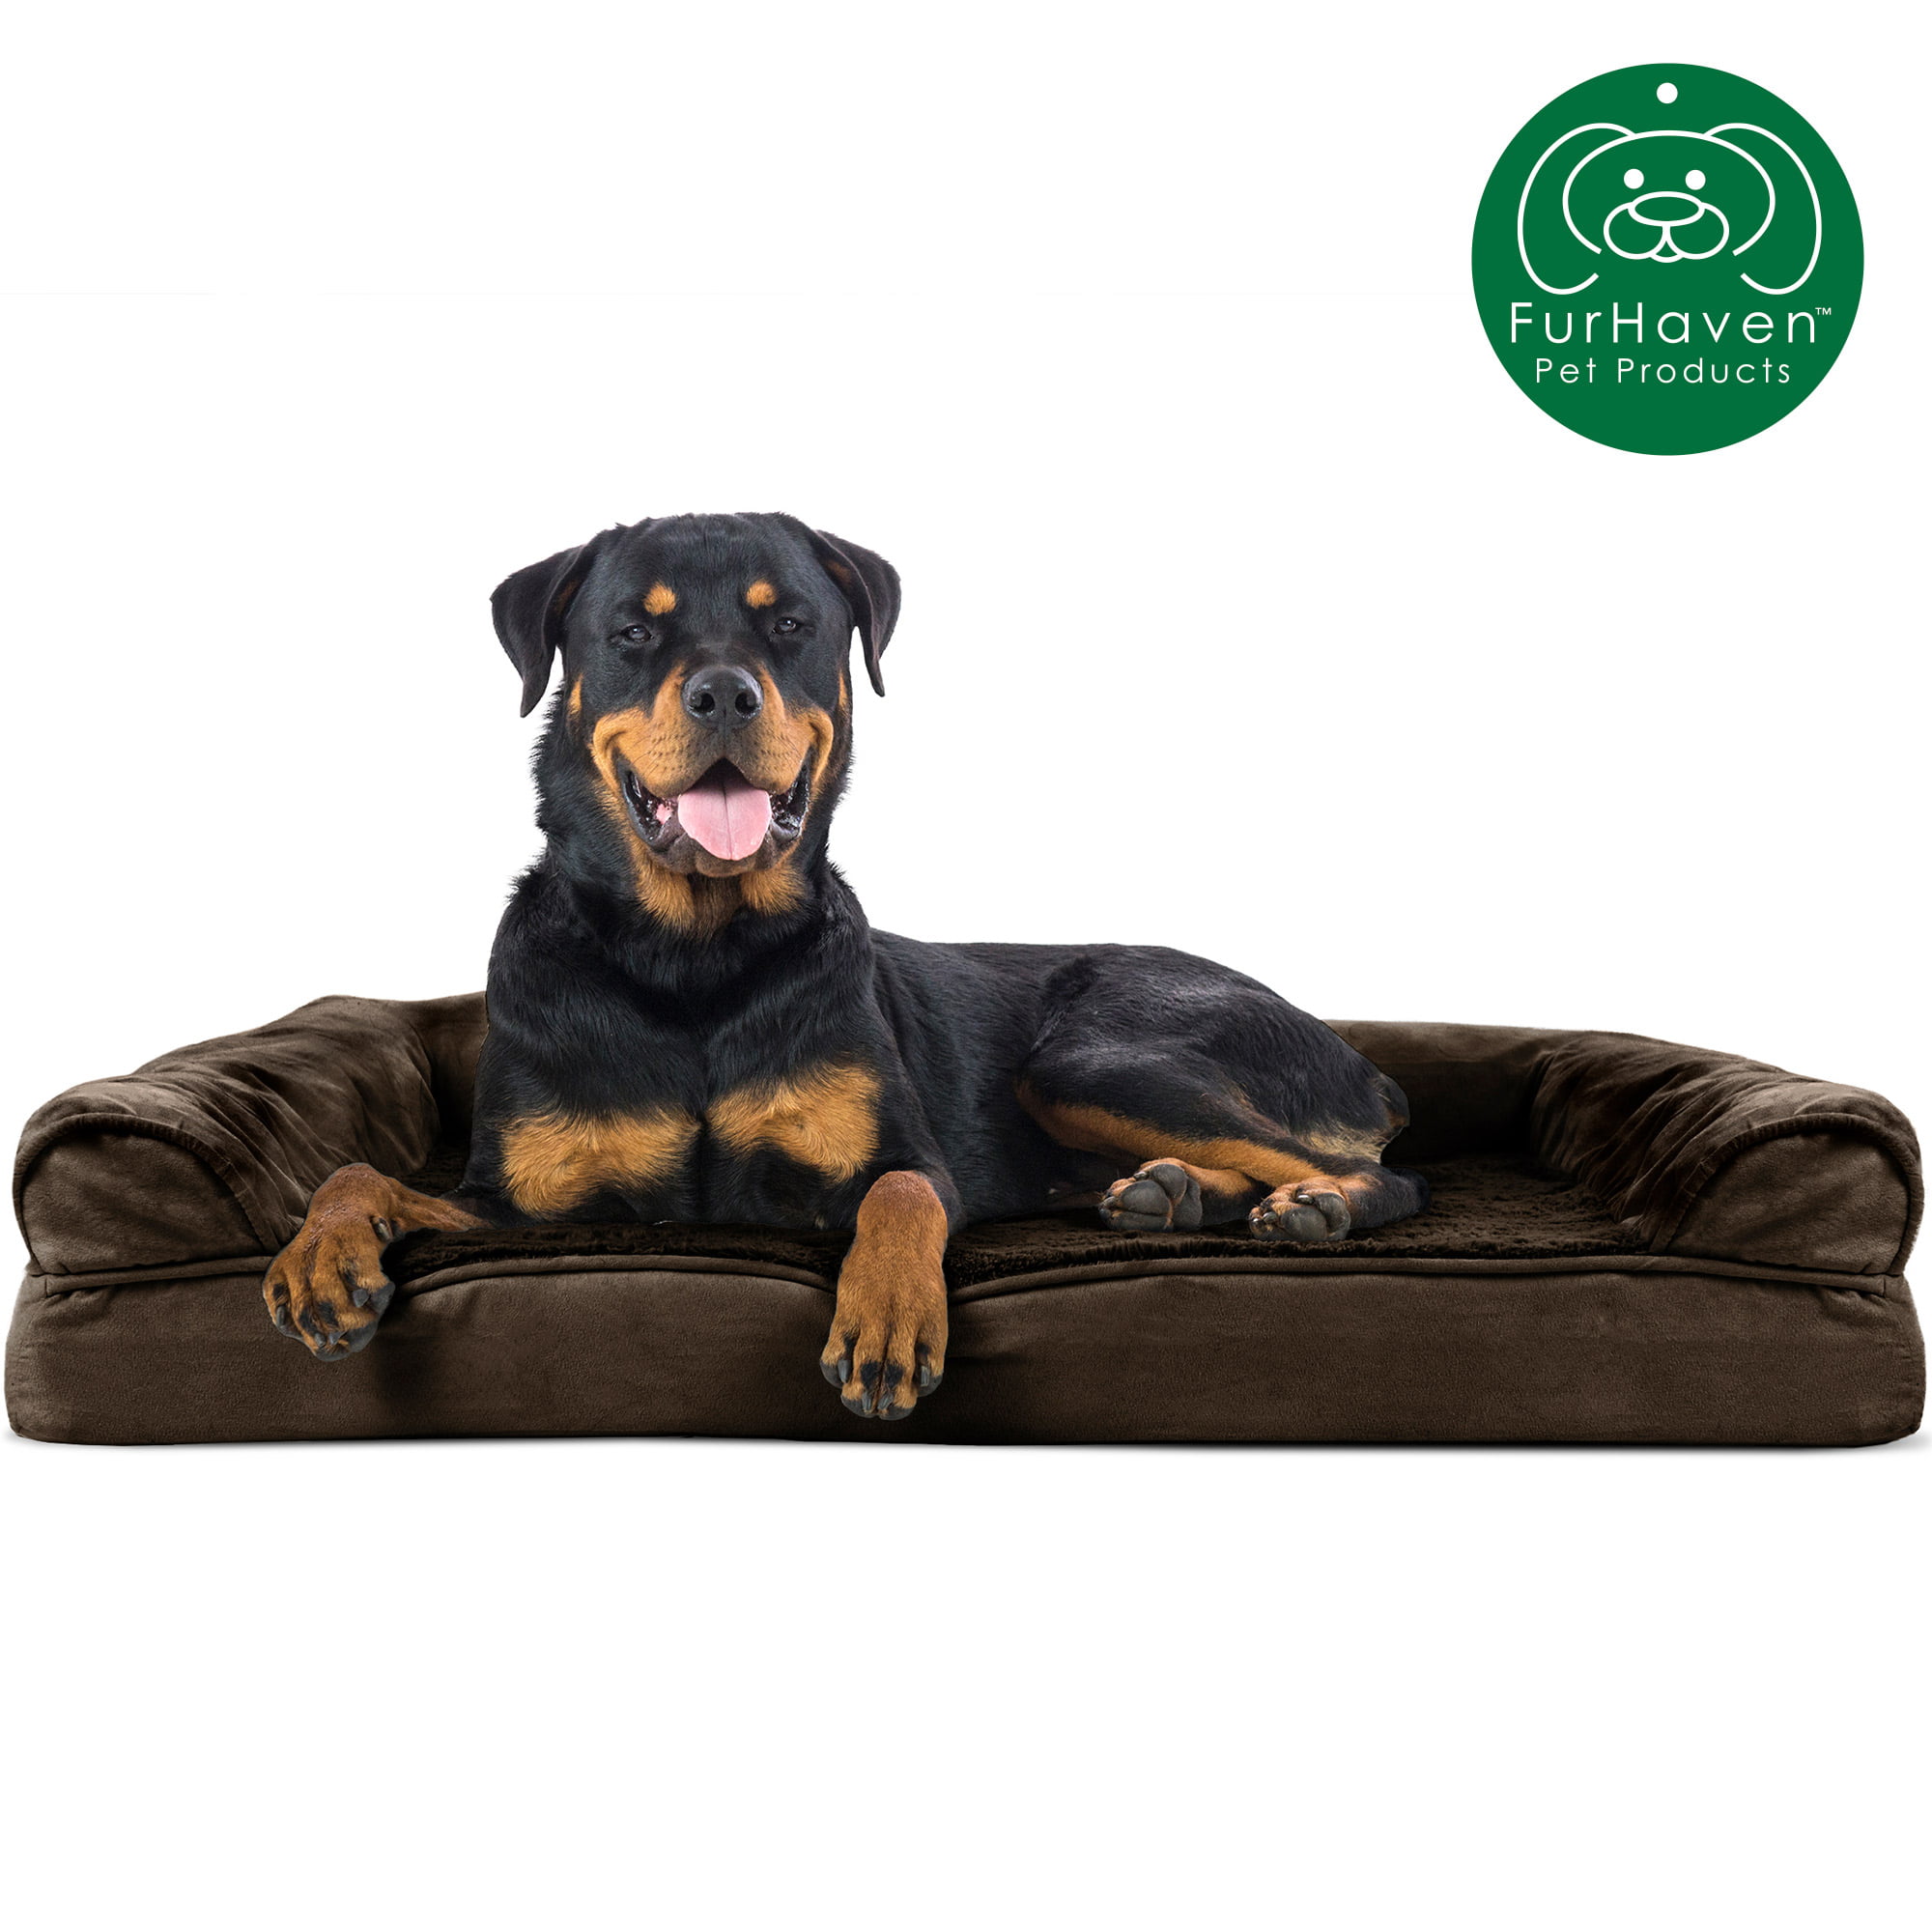 Available in Multiple Colors & Styles Orthopedic Sofa-Style Traditional Living Room Couch Pet Bed w/ Removable Cover for Dogs & Cats Furhaven Pet Dog Bed 